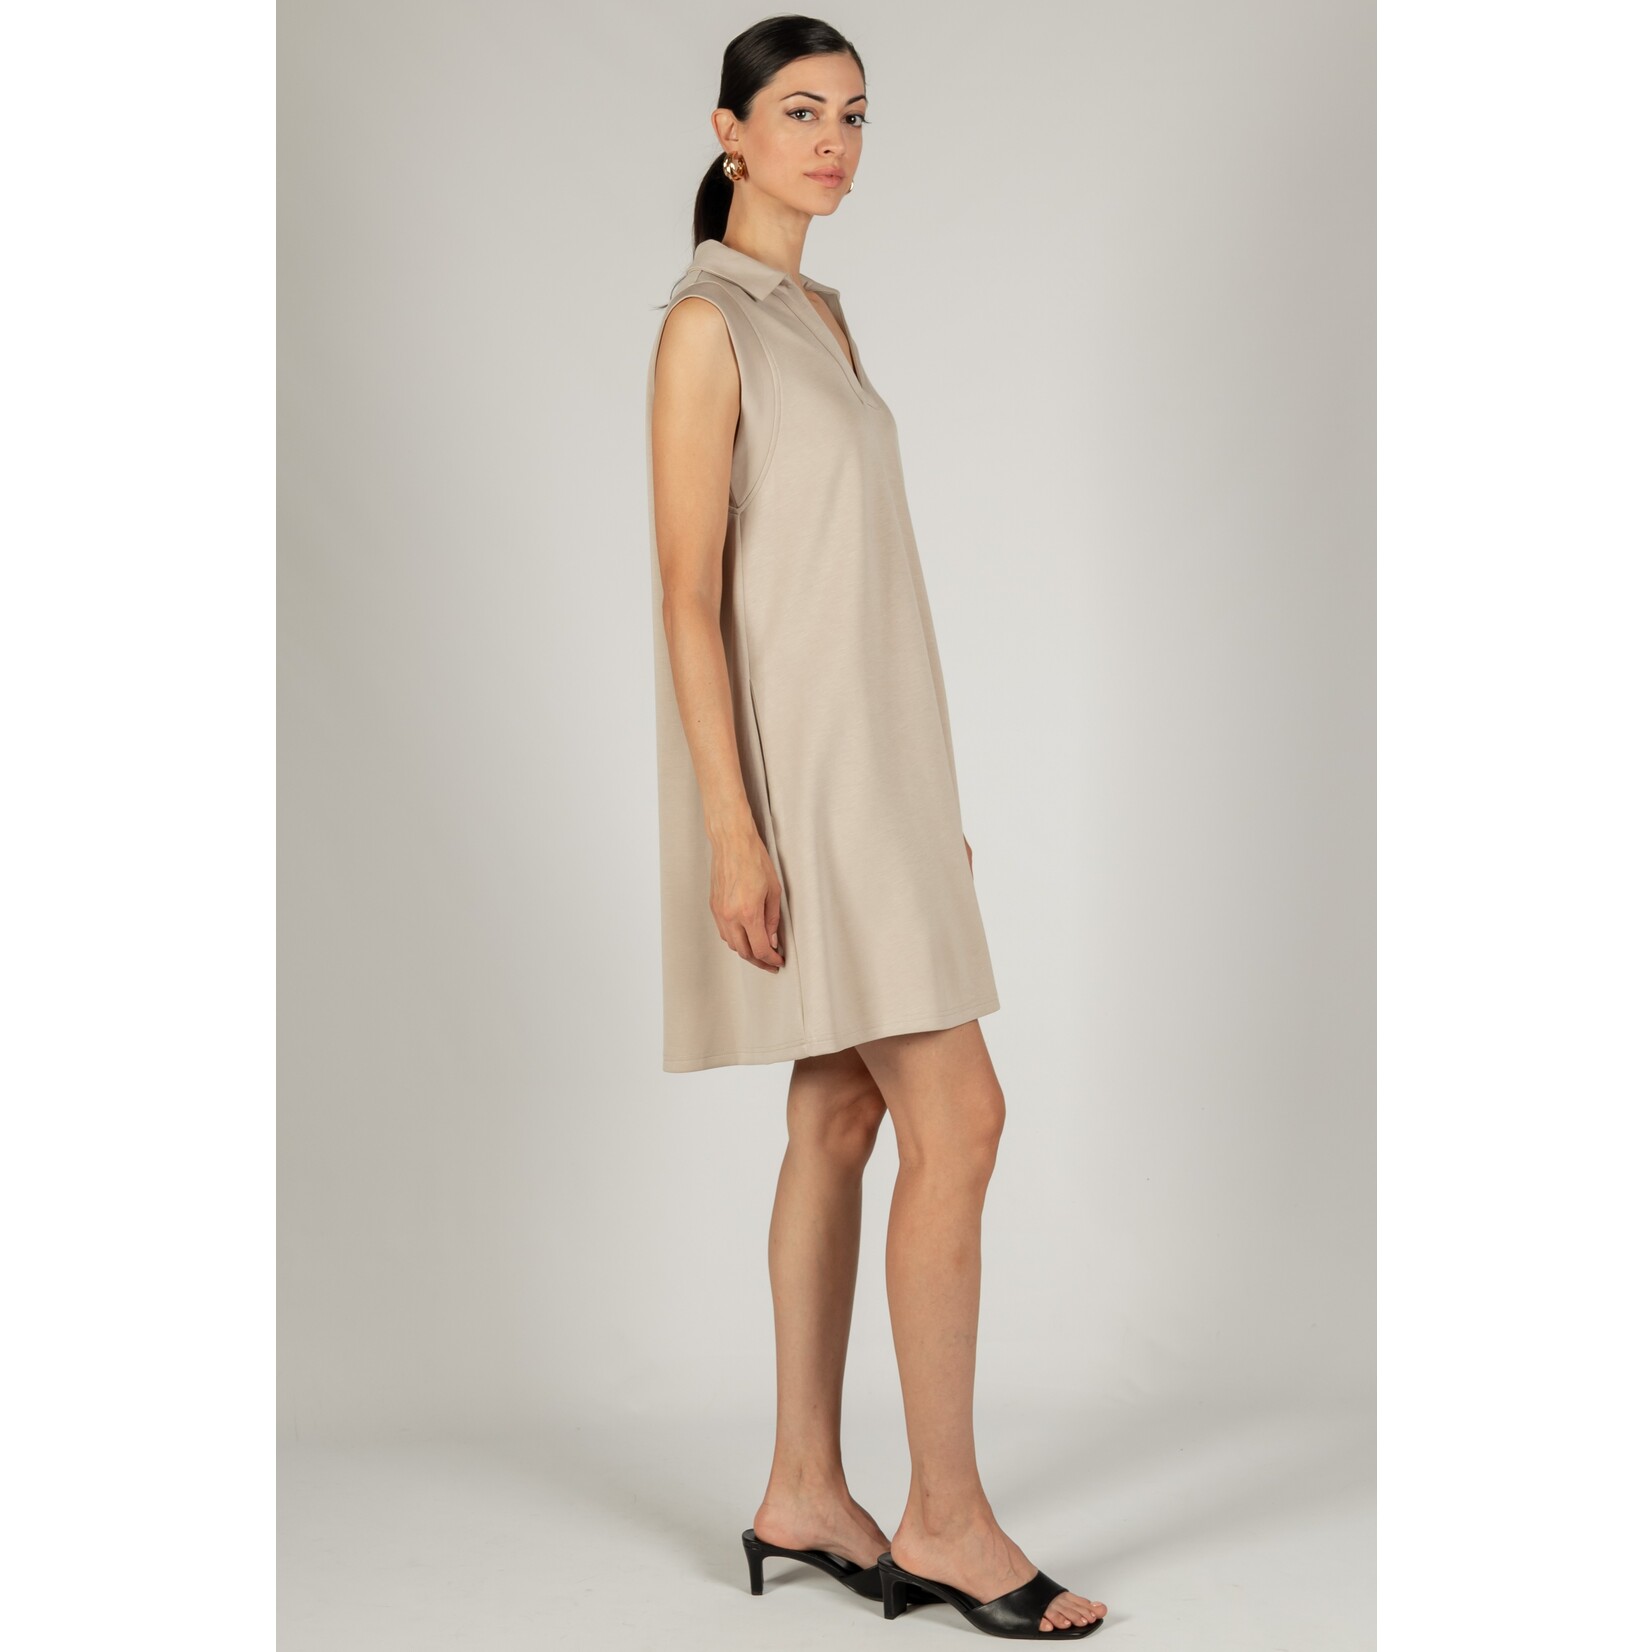 Claire Taupe Sleeveless Dress